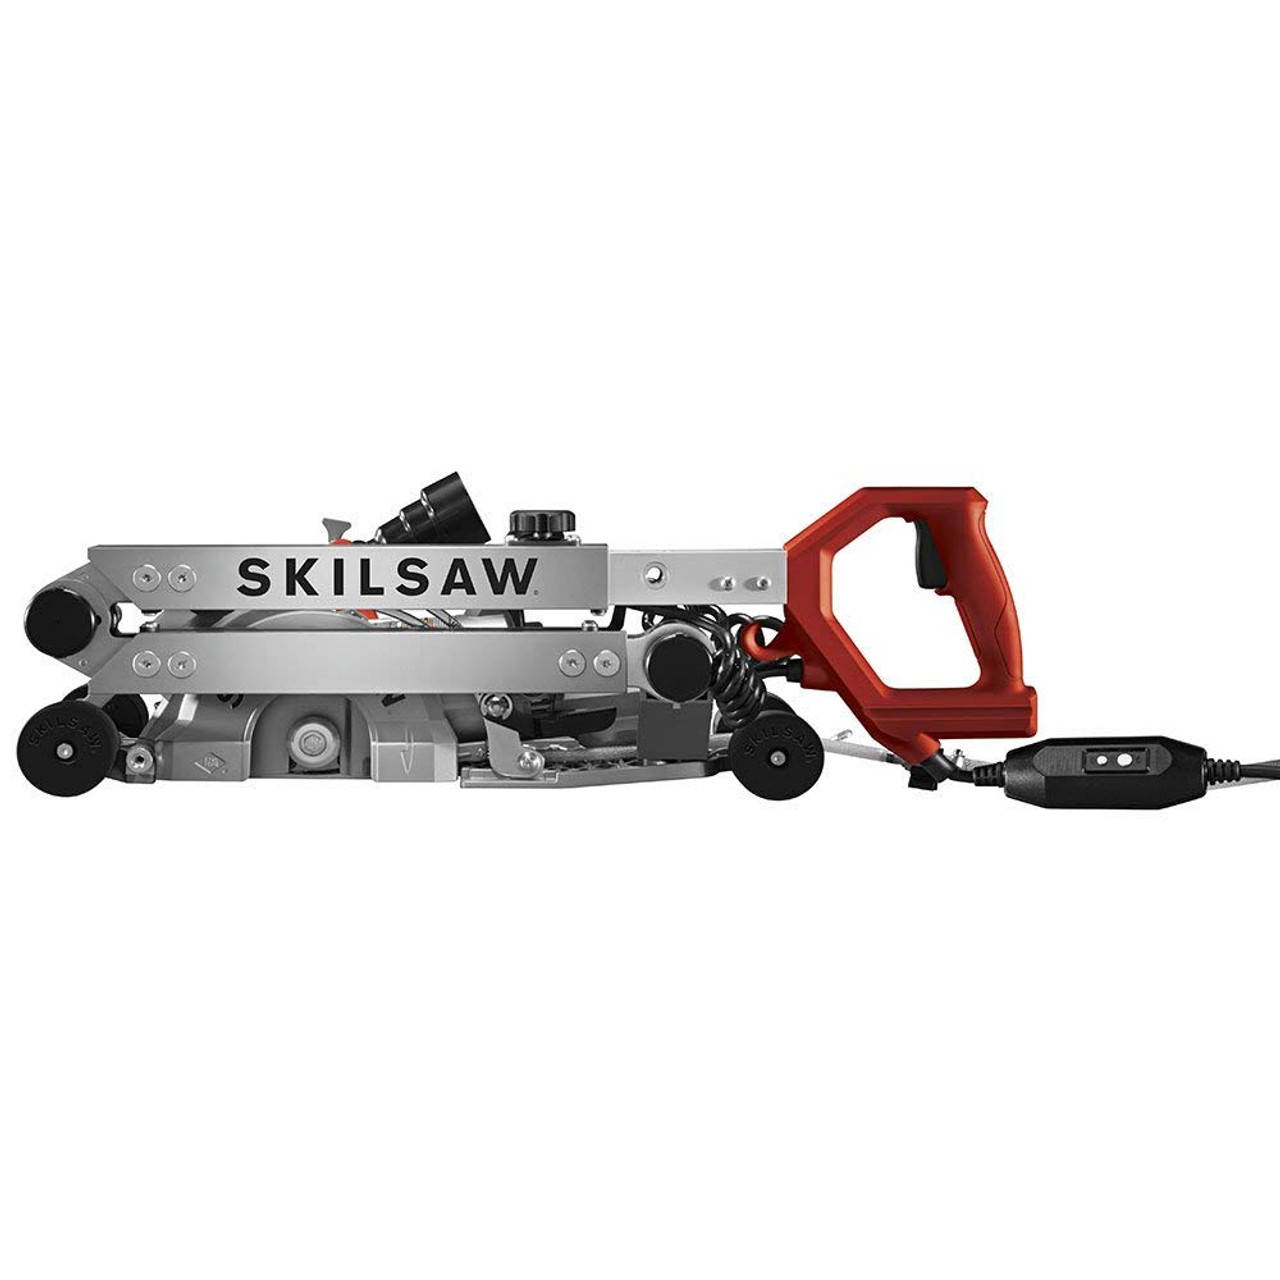 Skilsaw SKIL-SPT79A-10 7in MEDUSAW WALK BEHIND Worm Drive Saw for Concrete  Atlas-Machinery